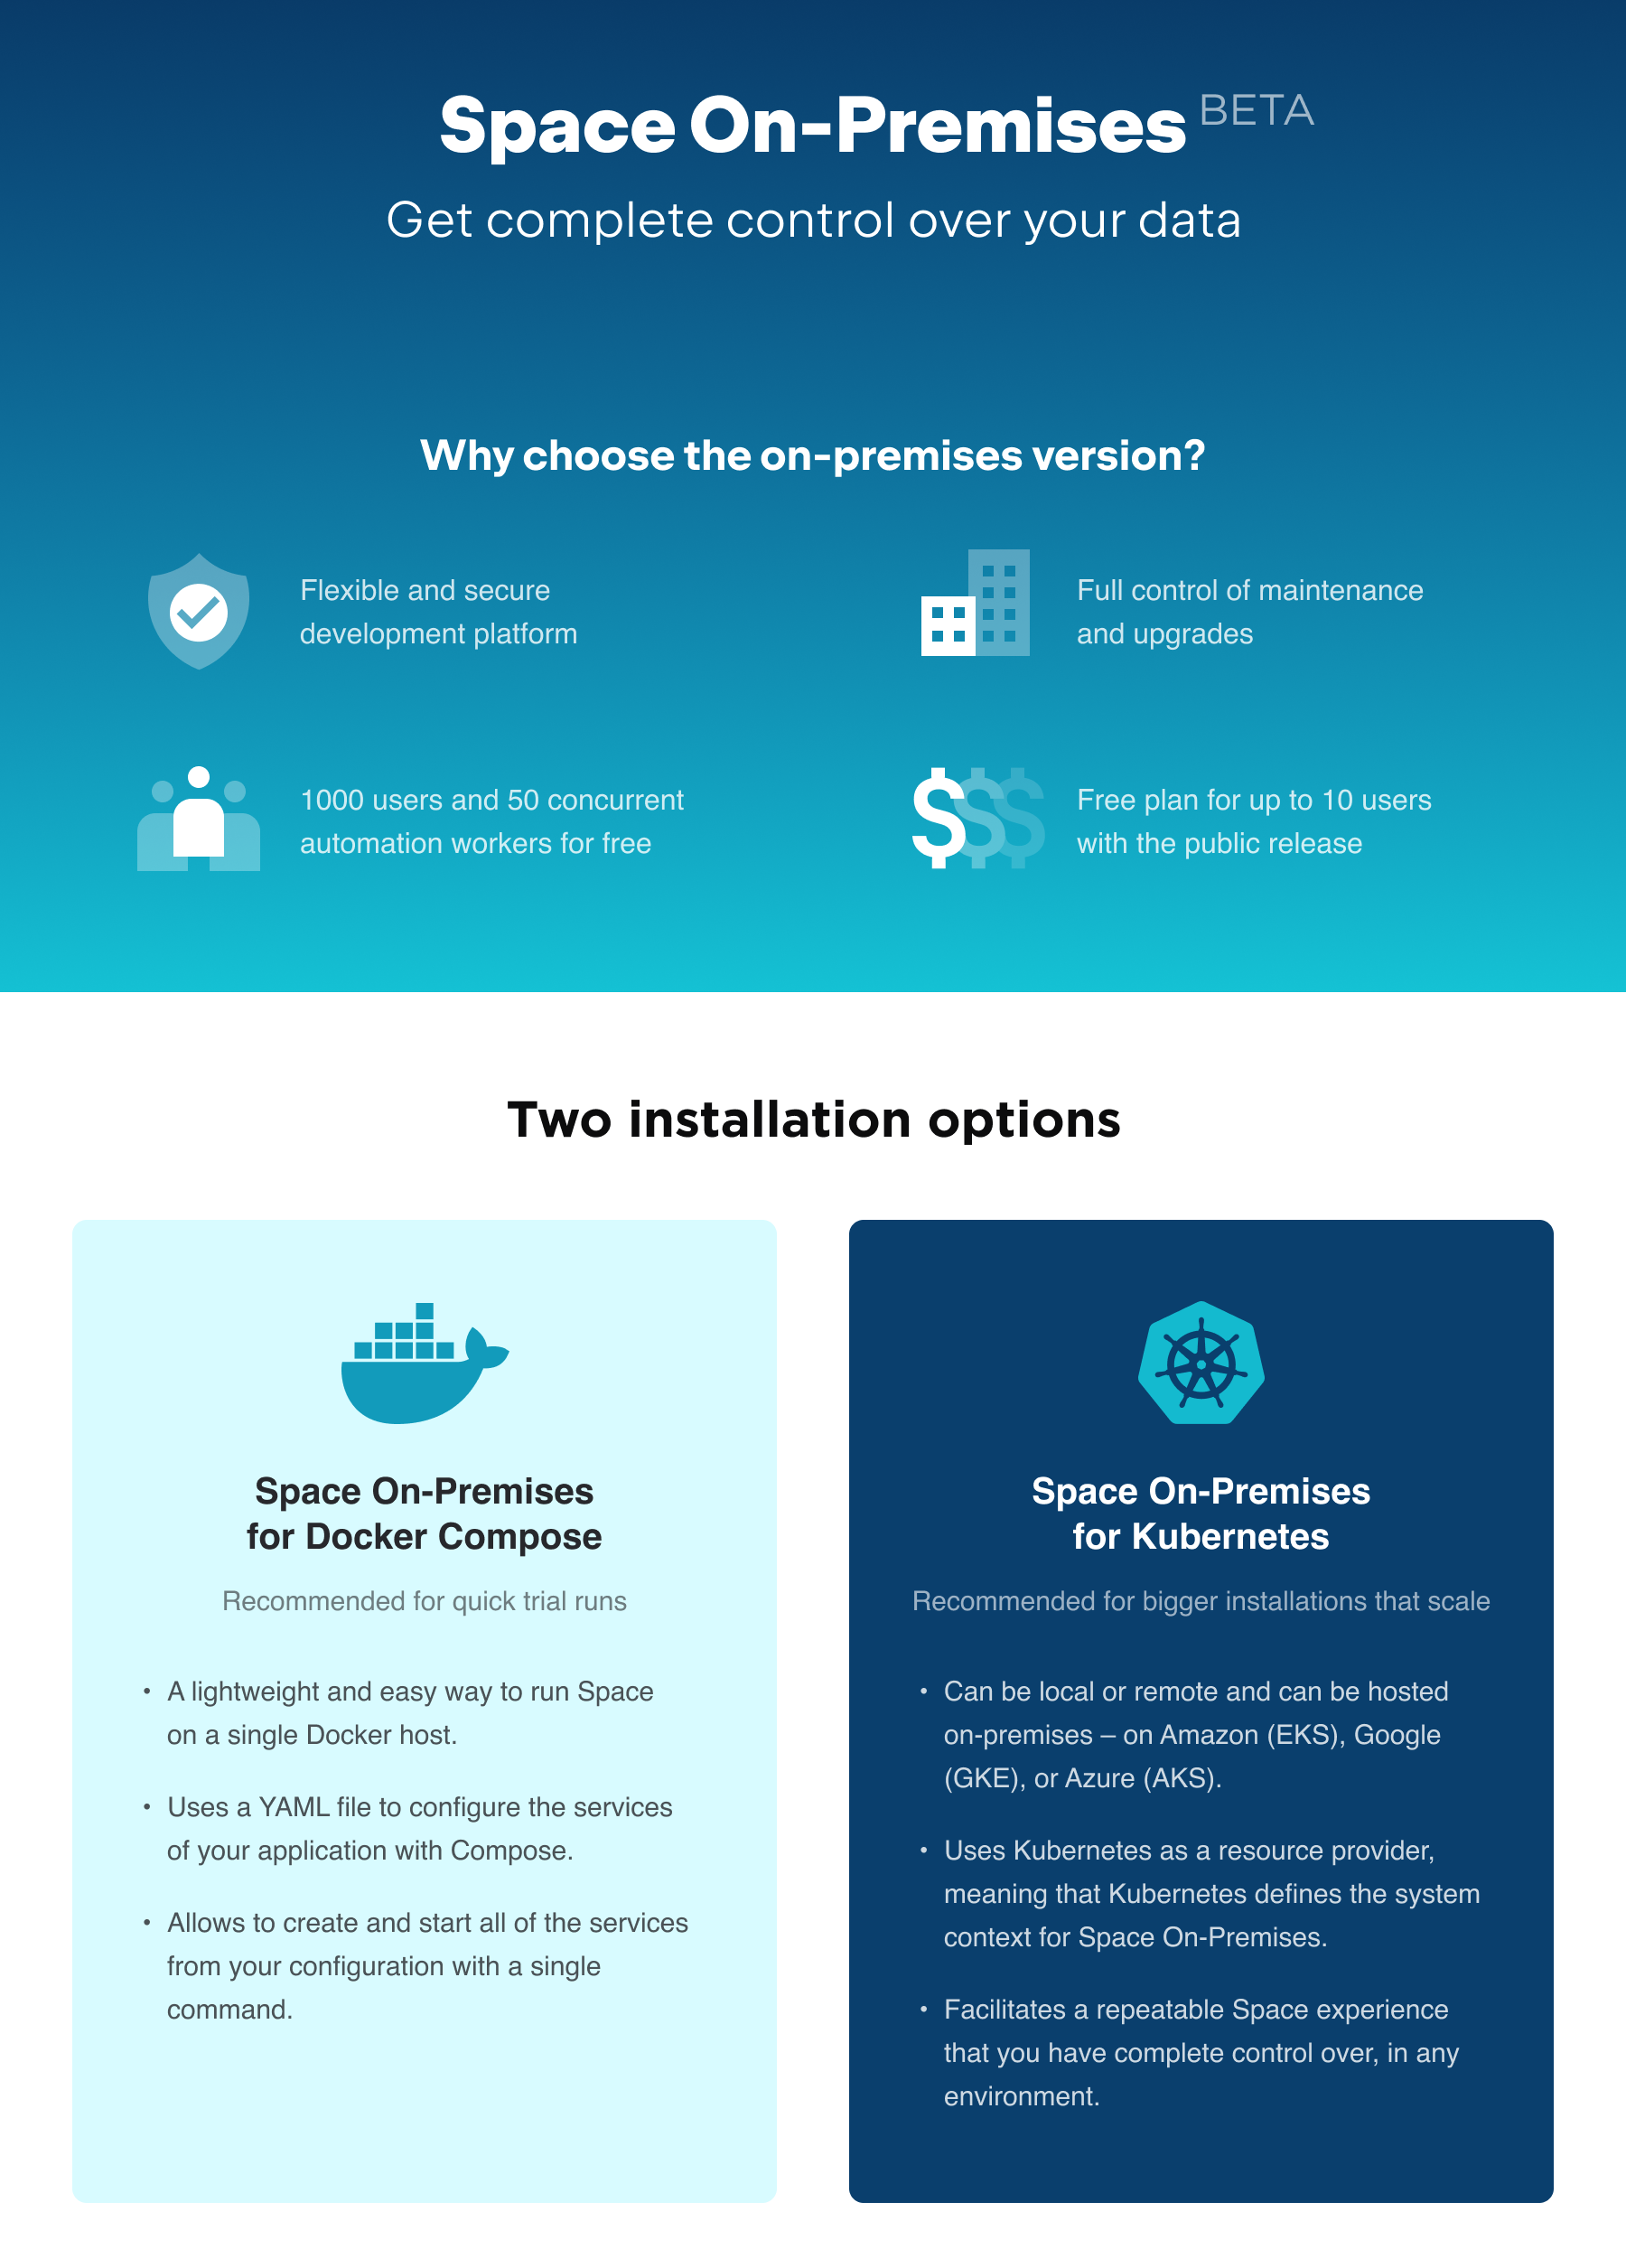 Why choose the Space On-Premises version?